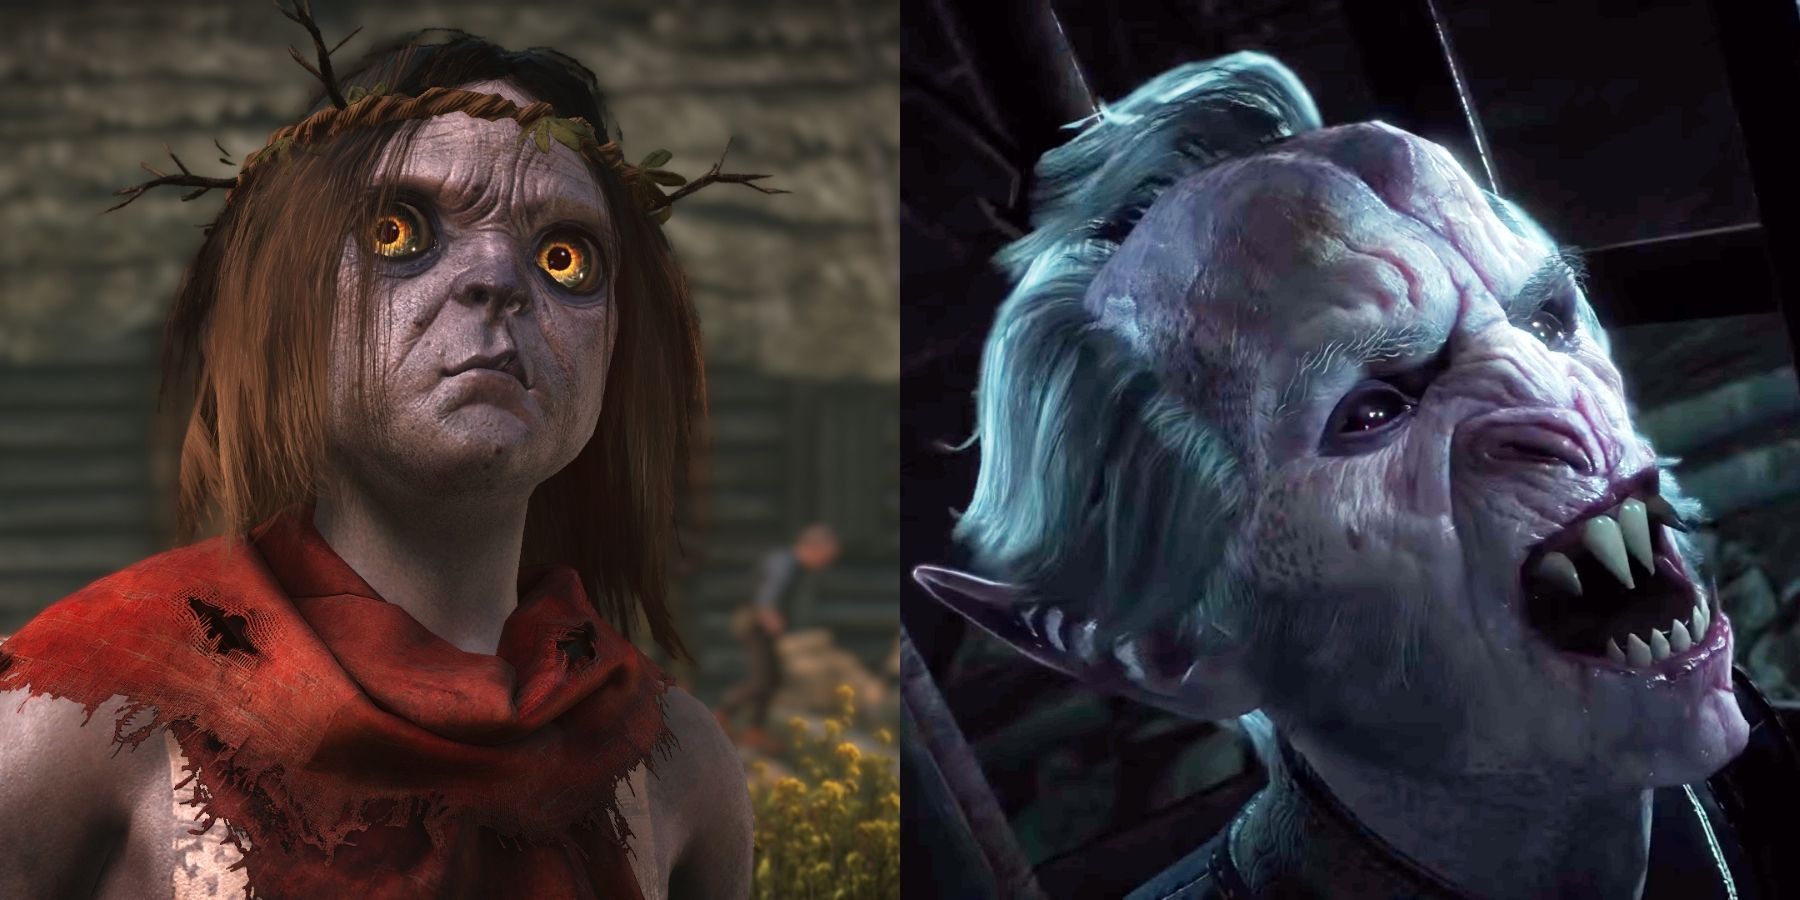 5 Monsters That Fans Hope to See in Netflix's The Witcher Season 2